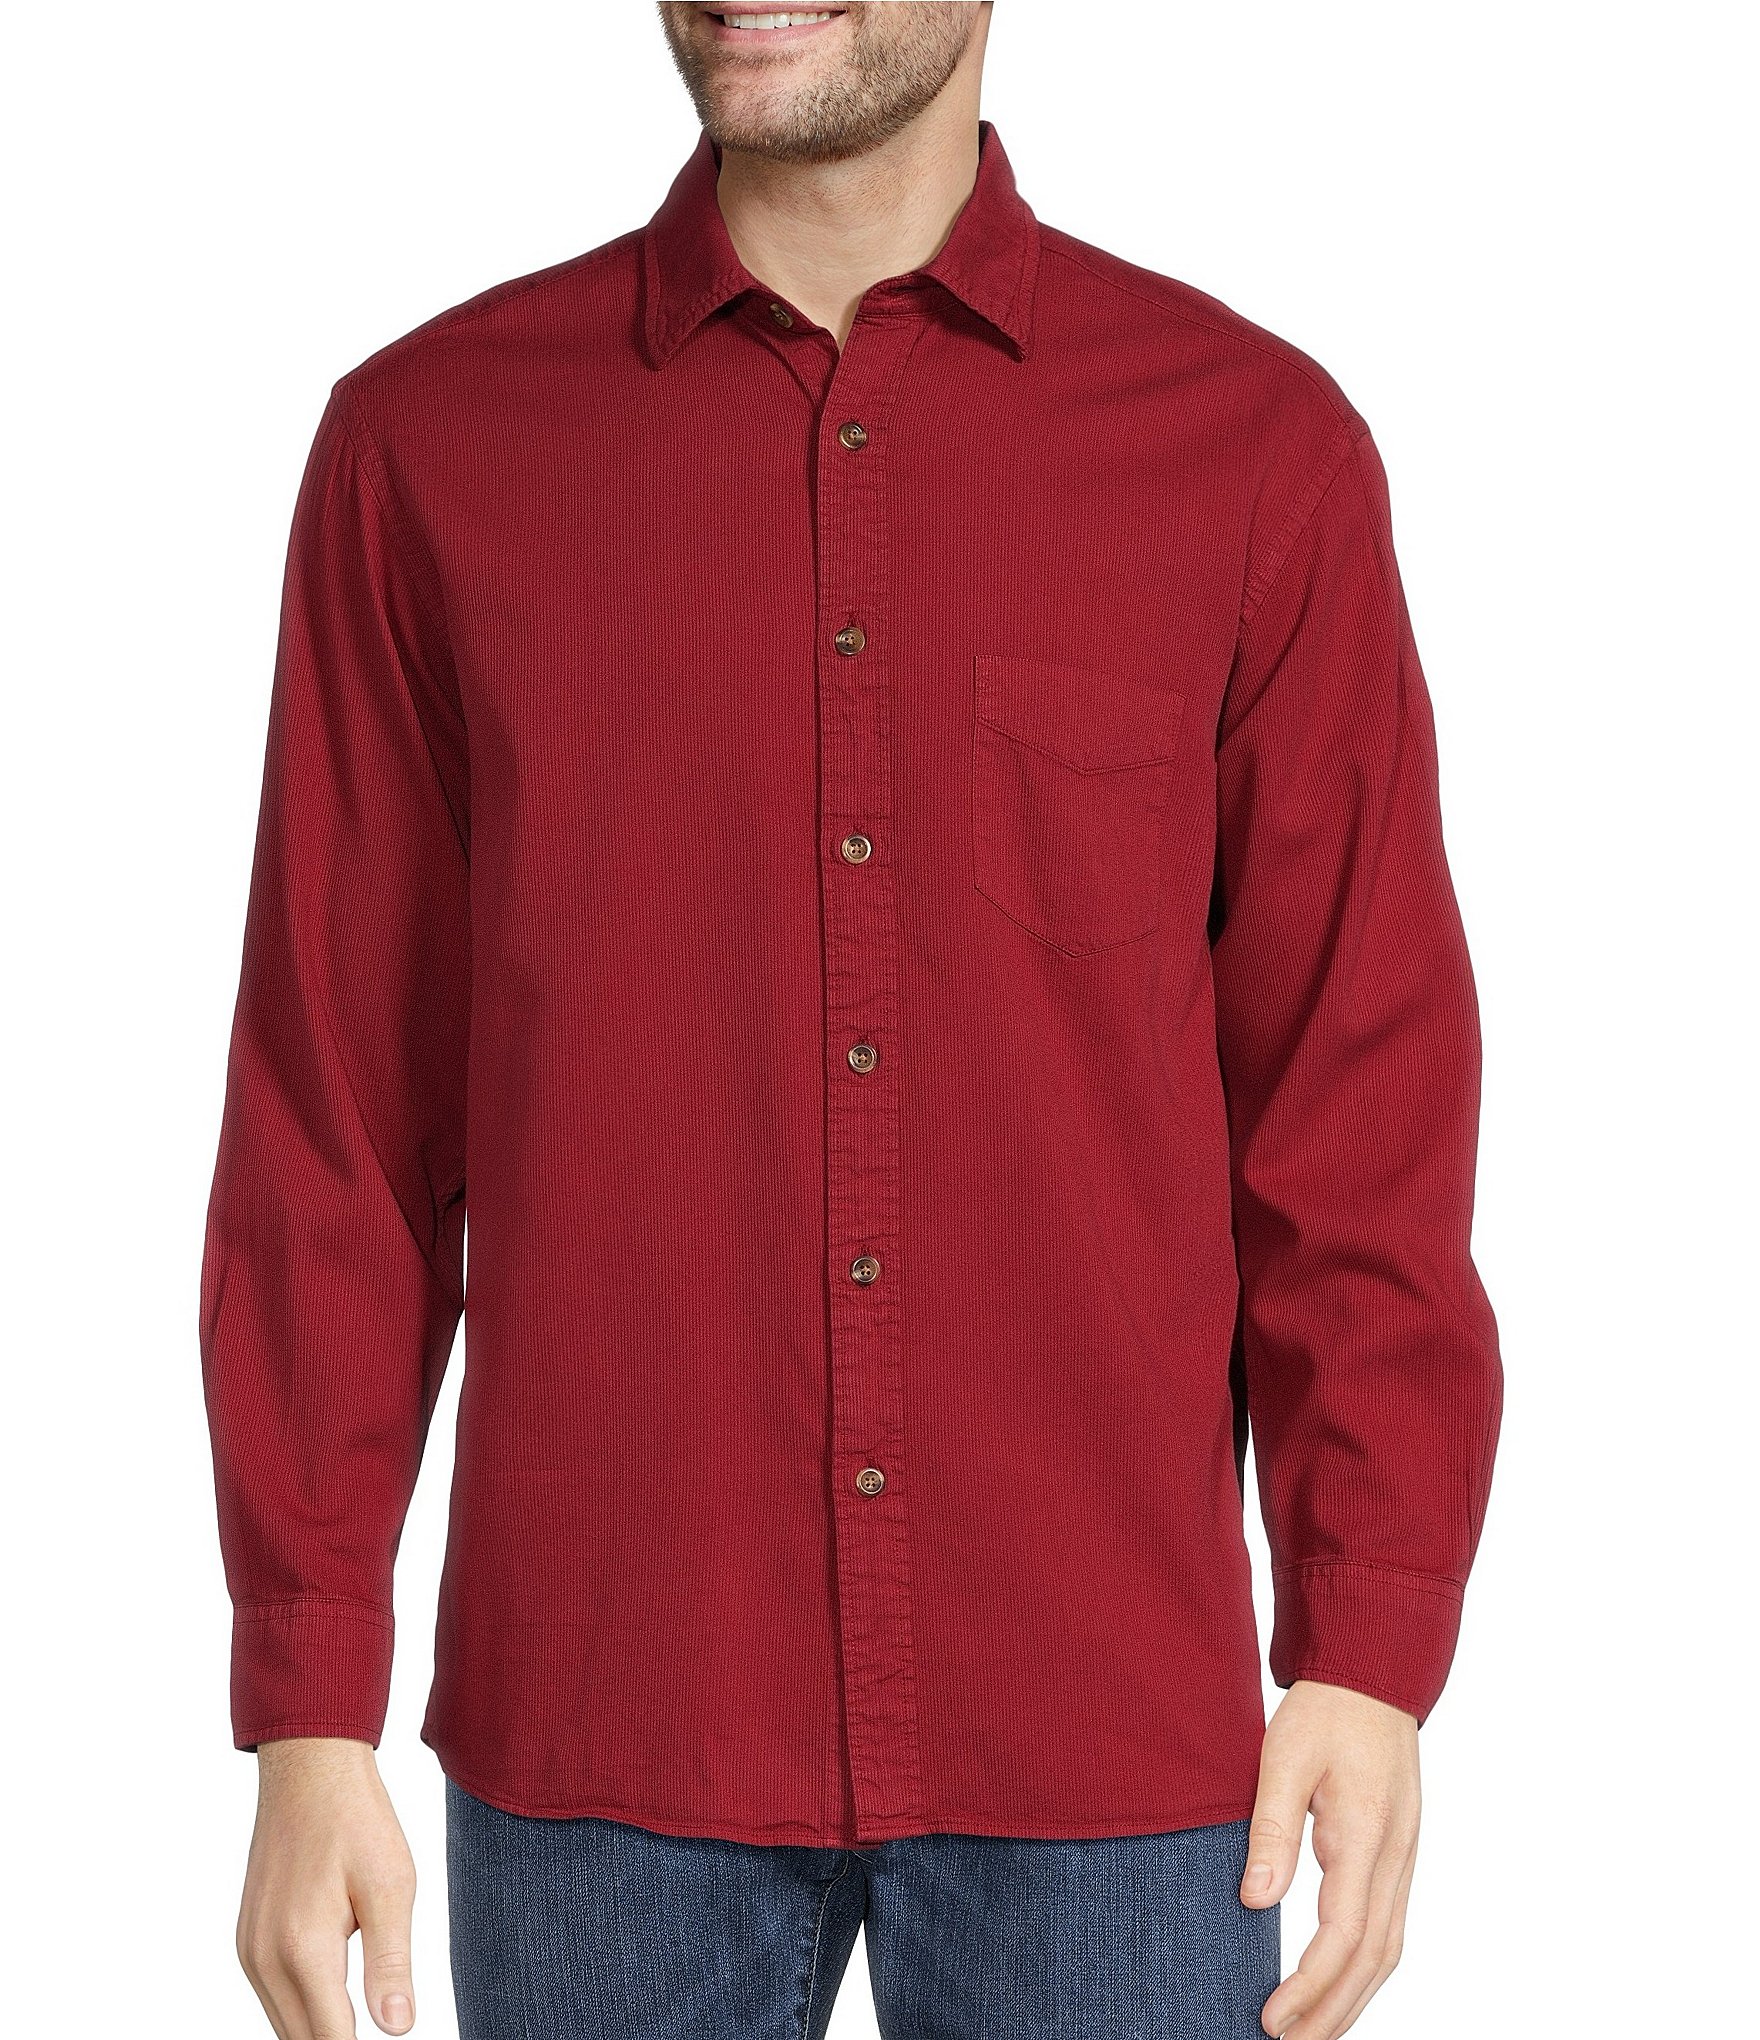  Roundtree & Yorke Performance Stretch Moisture-Wicking Men's  Long Sleeve Shirt, Regular and Big and Tall Sizes (Dark Red 221 & Blue,  Medium) : Clothing, Shoes & Jewelry